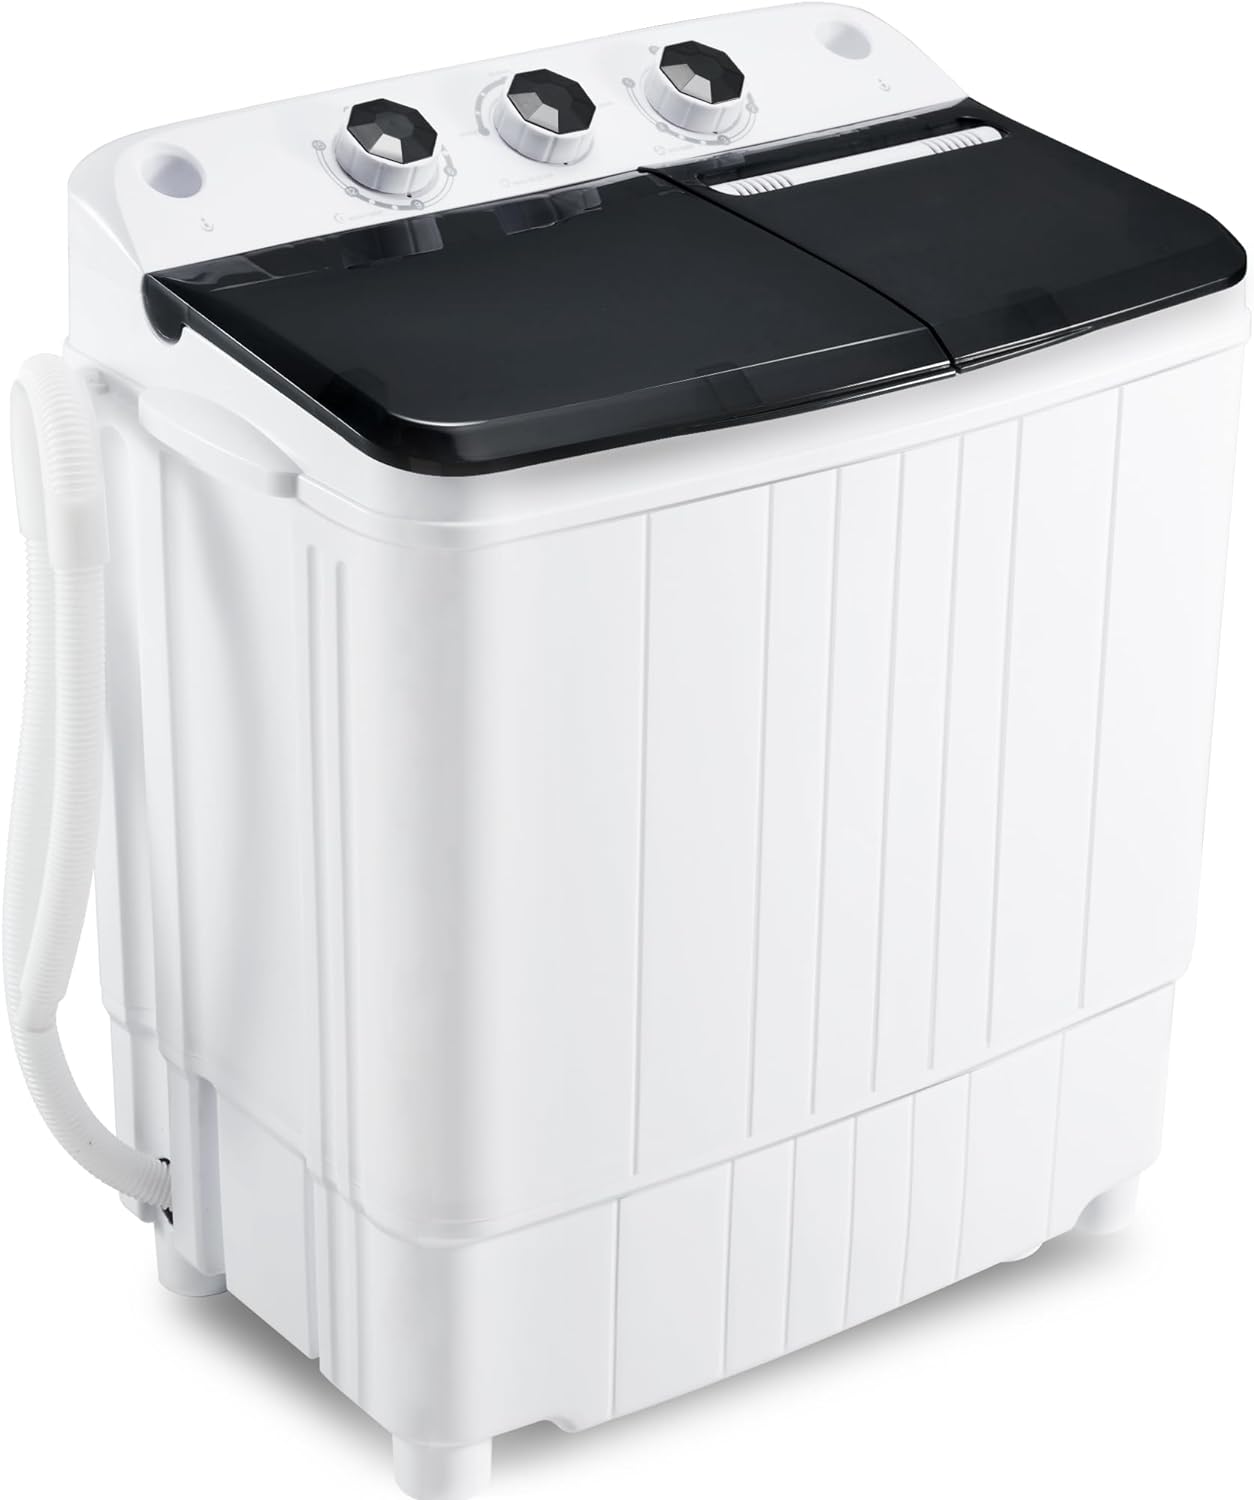 Portable Washing machine 17.6Lbs Capacity Mini Washer and Dryer Combo Compact Twin Tub Laundry Washer(11.6Lbs) & Spinner(6Lbs) with Gravity Drain,Low Noise for Apartment,Dorms,RV Camping, BLACK